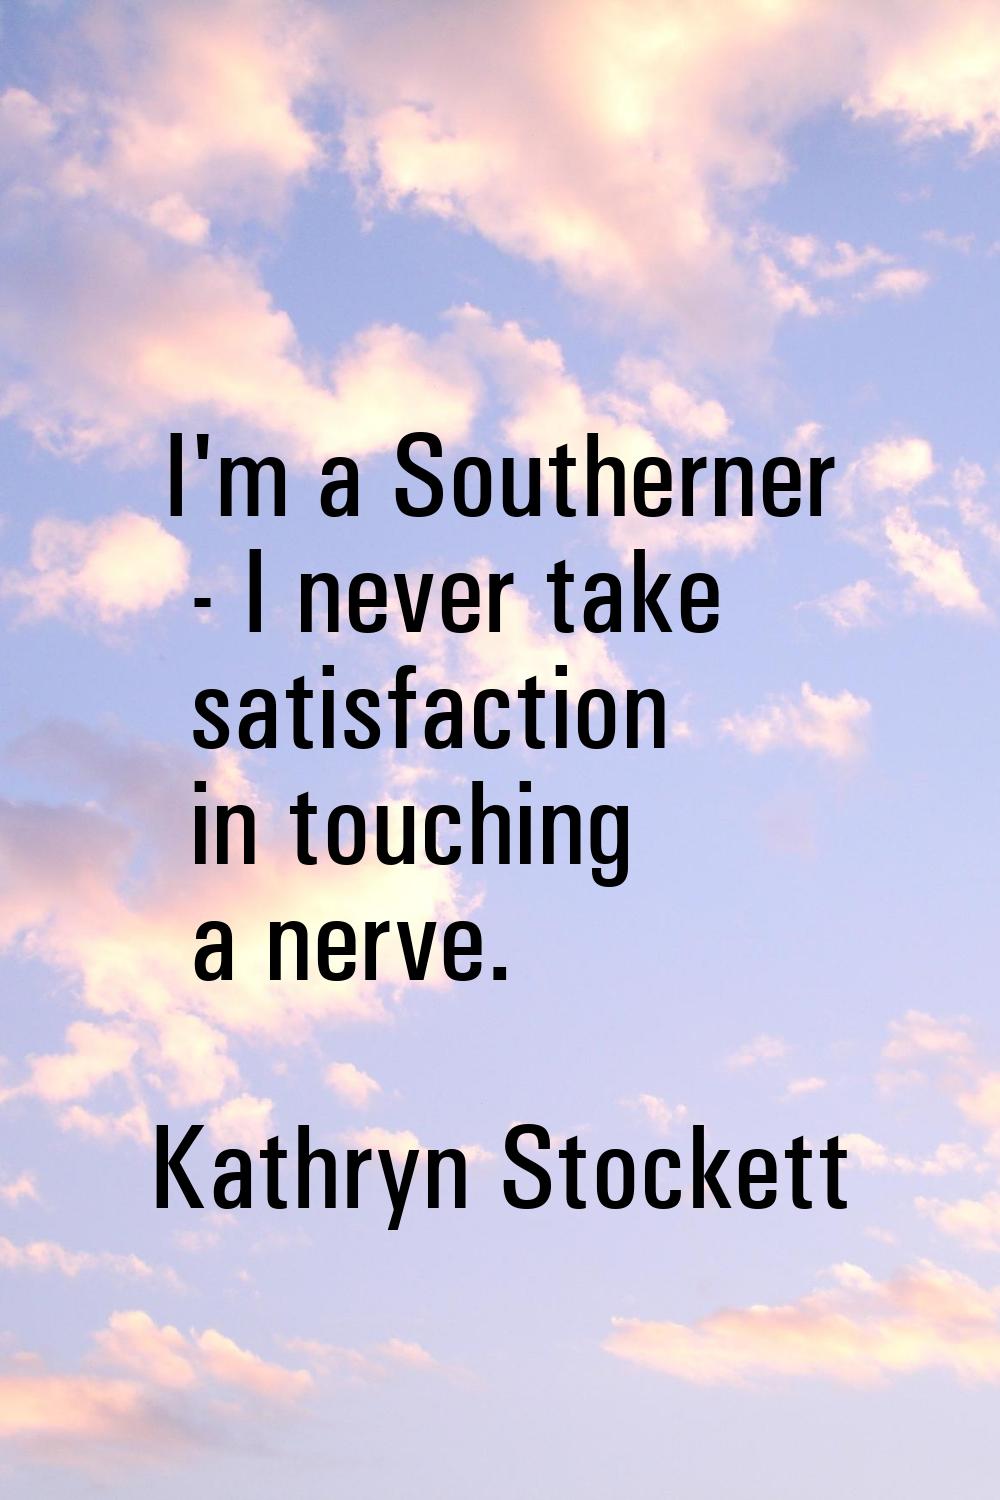 I'm a Southerner - I never take satisfaction in touching a nerve.